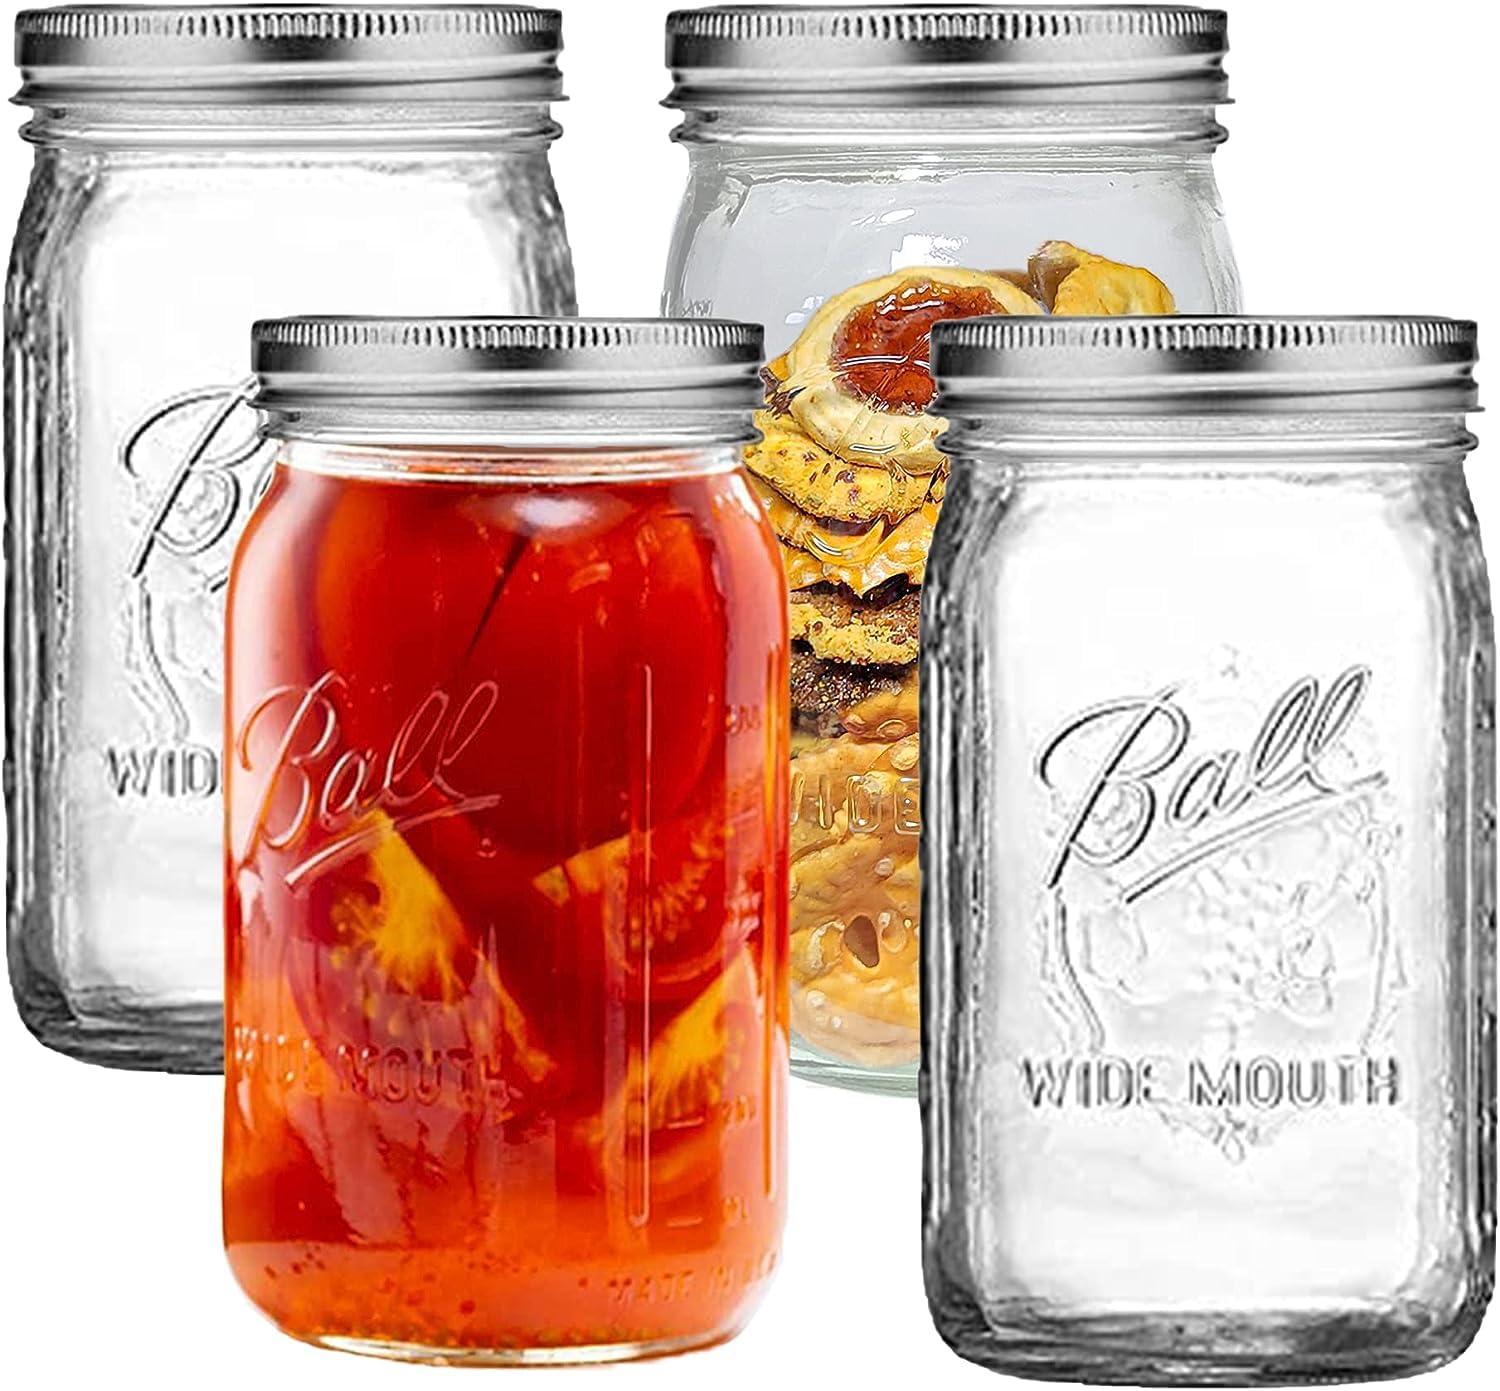 CAMDEPOSU Wide Mouth Mason Jars 32 oz - (4 Pack) Ball Quart With Airtight lids and Bands For Canning, Fermenting, Pickling, Freezing, Storage Glass jar, Microwave & Dishwasher Safe, Clear